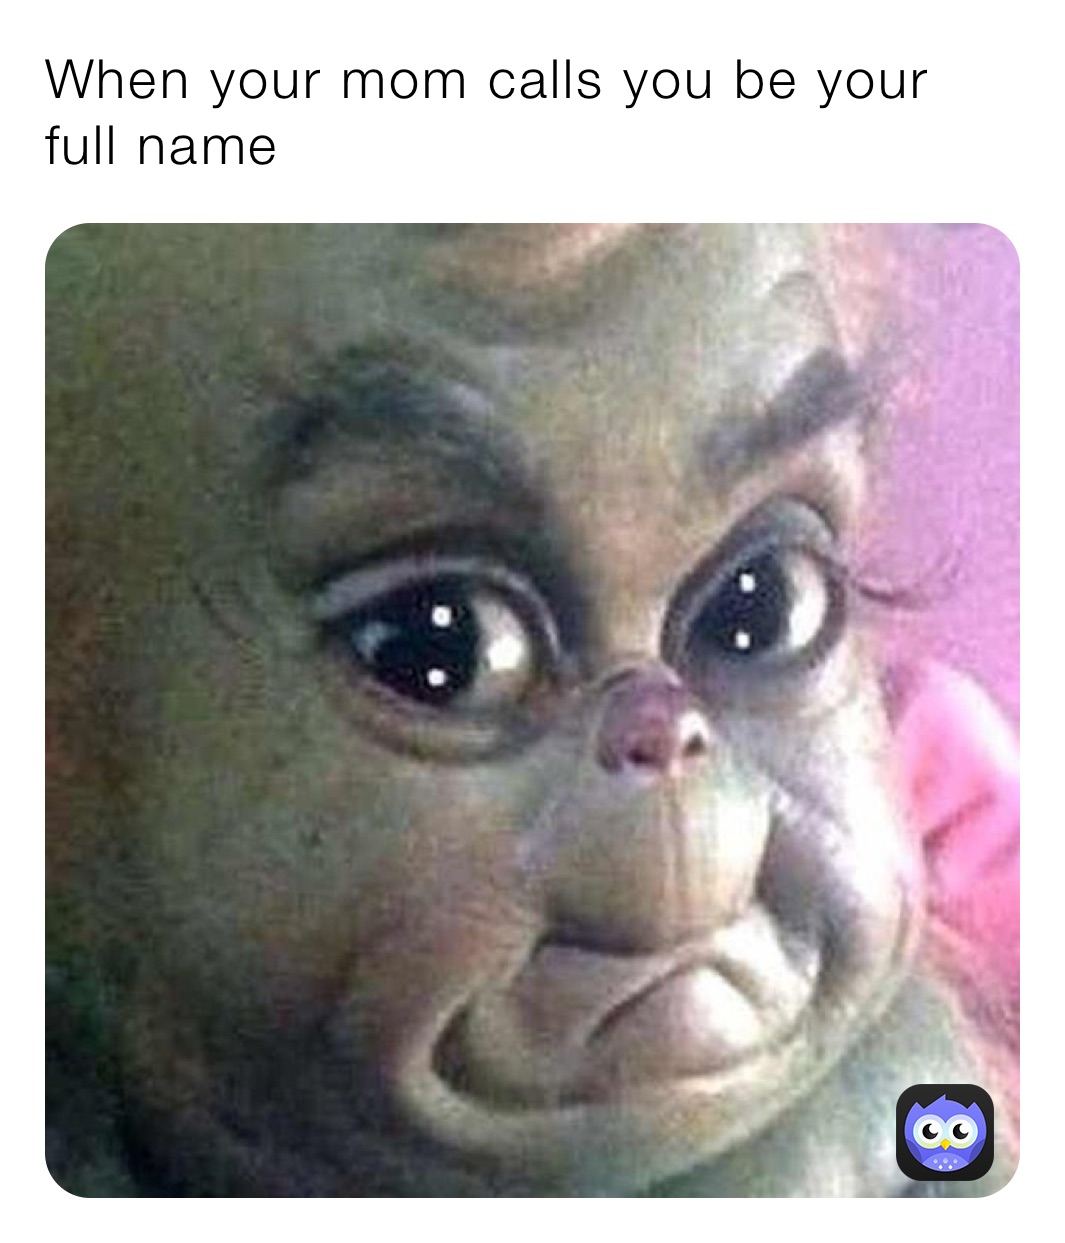 When your mom calls you be your full name